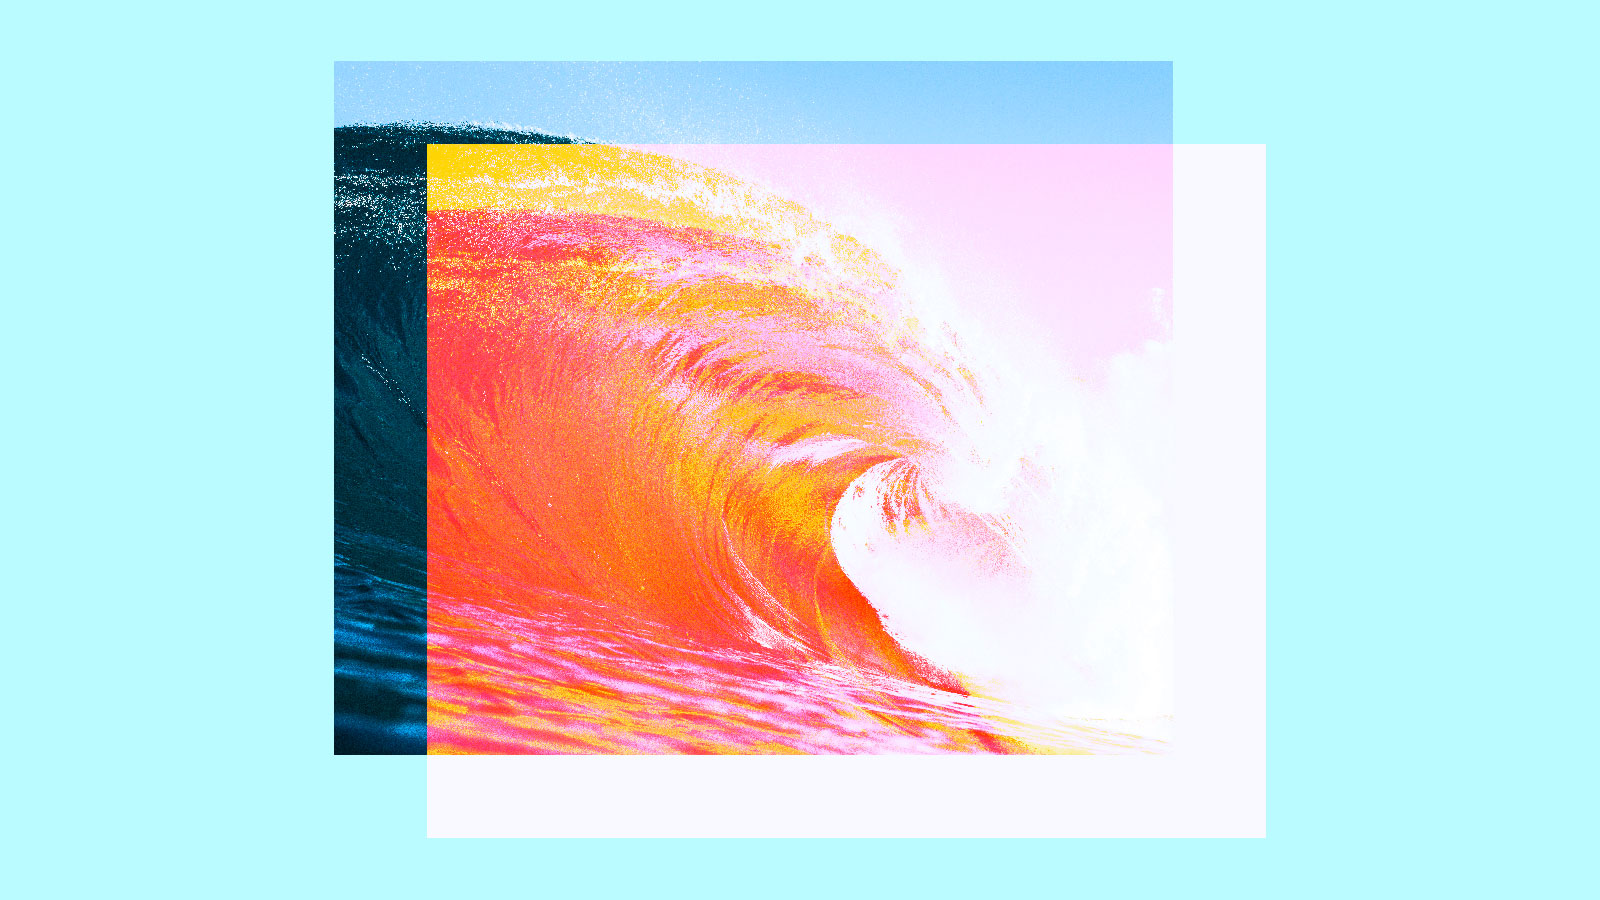 Collage: An ocean wave in shades of pink and orange and yellow